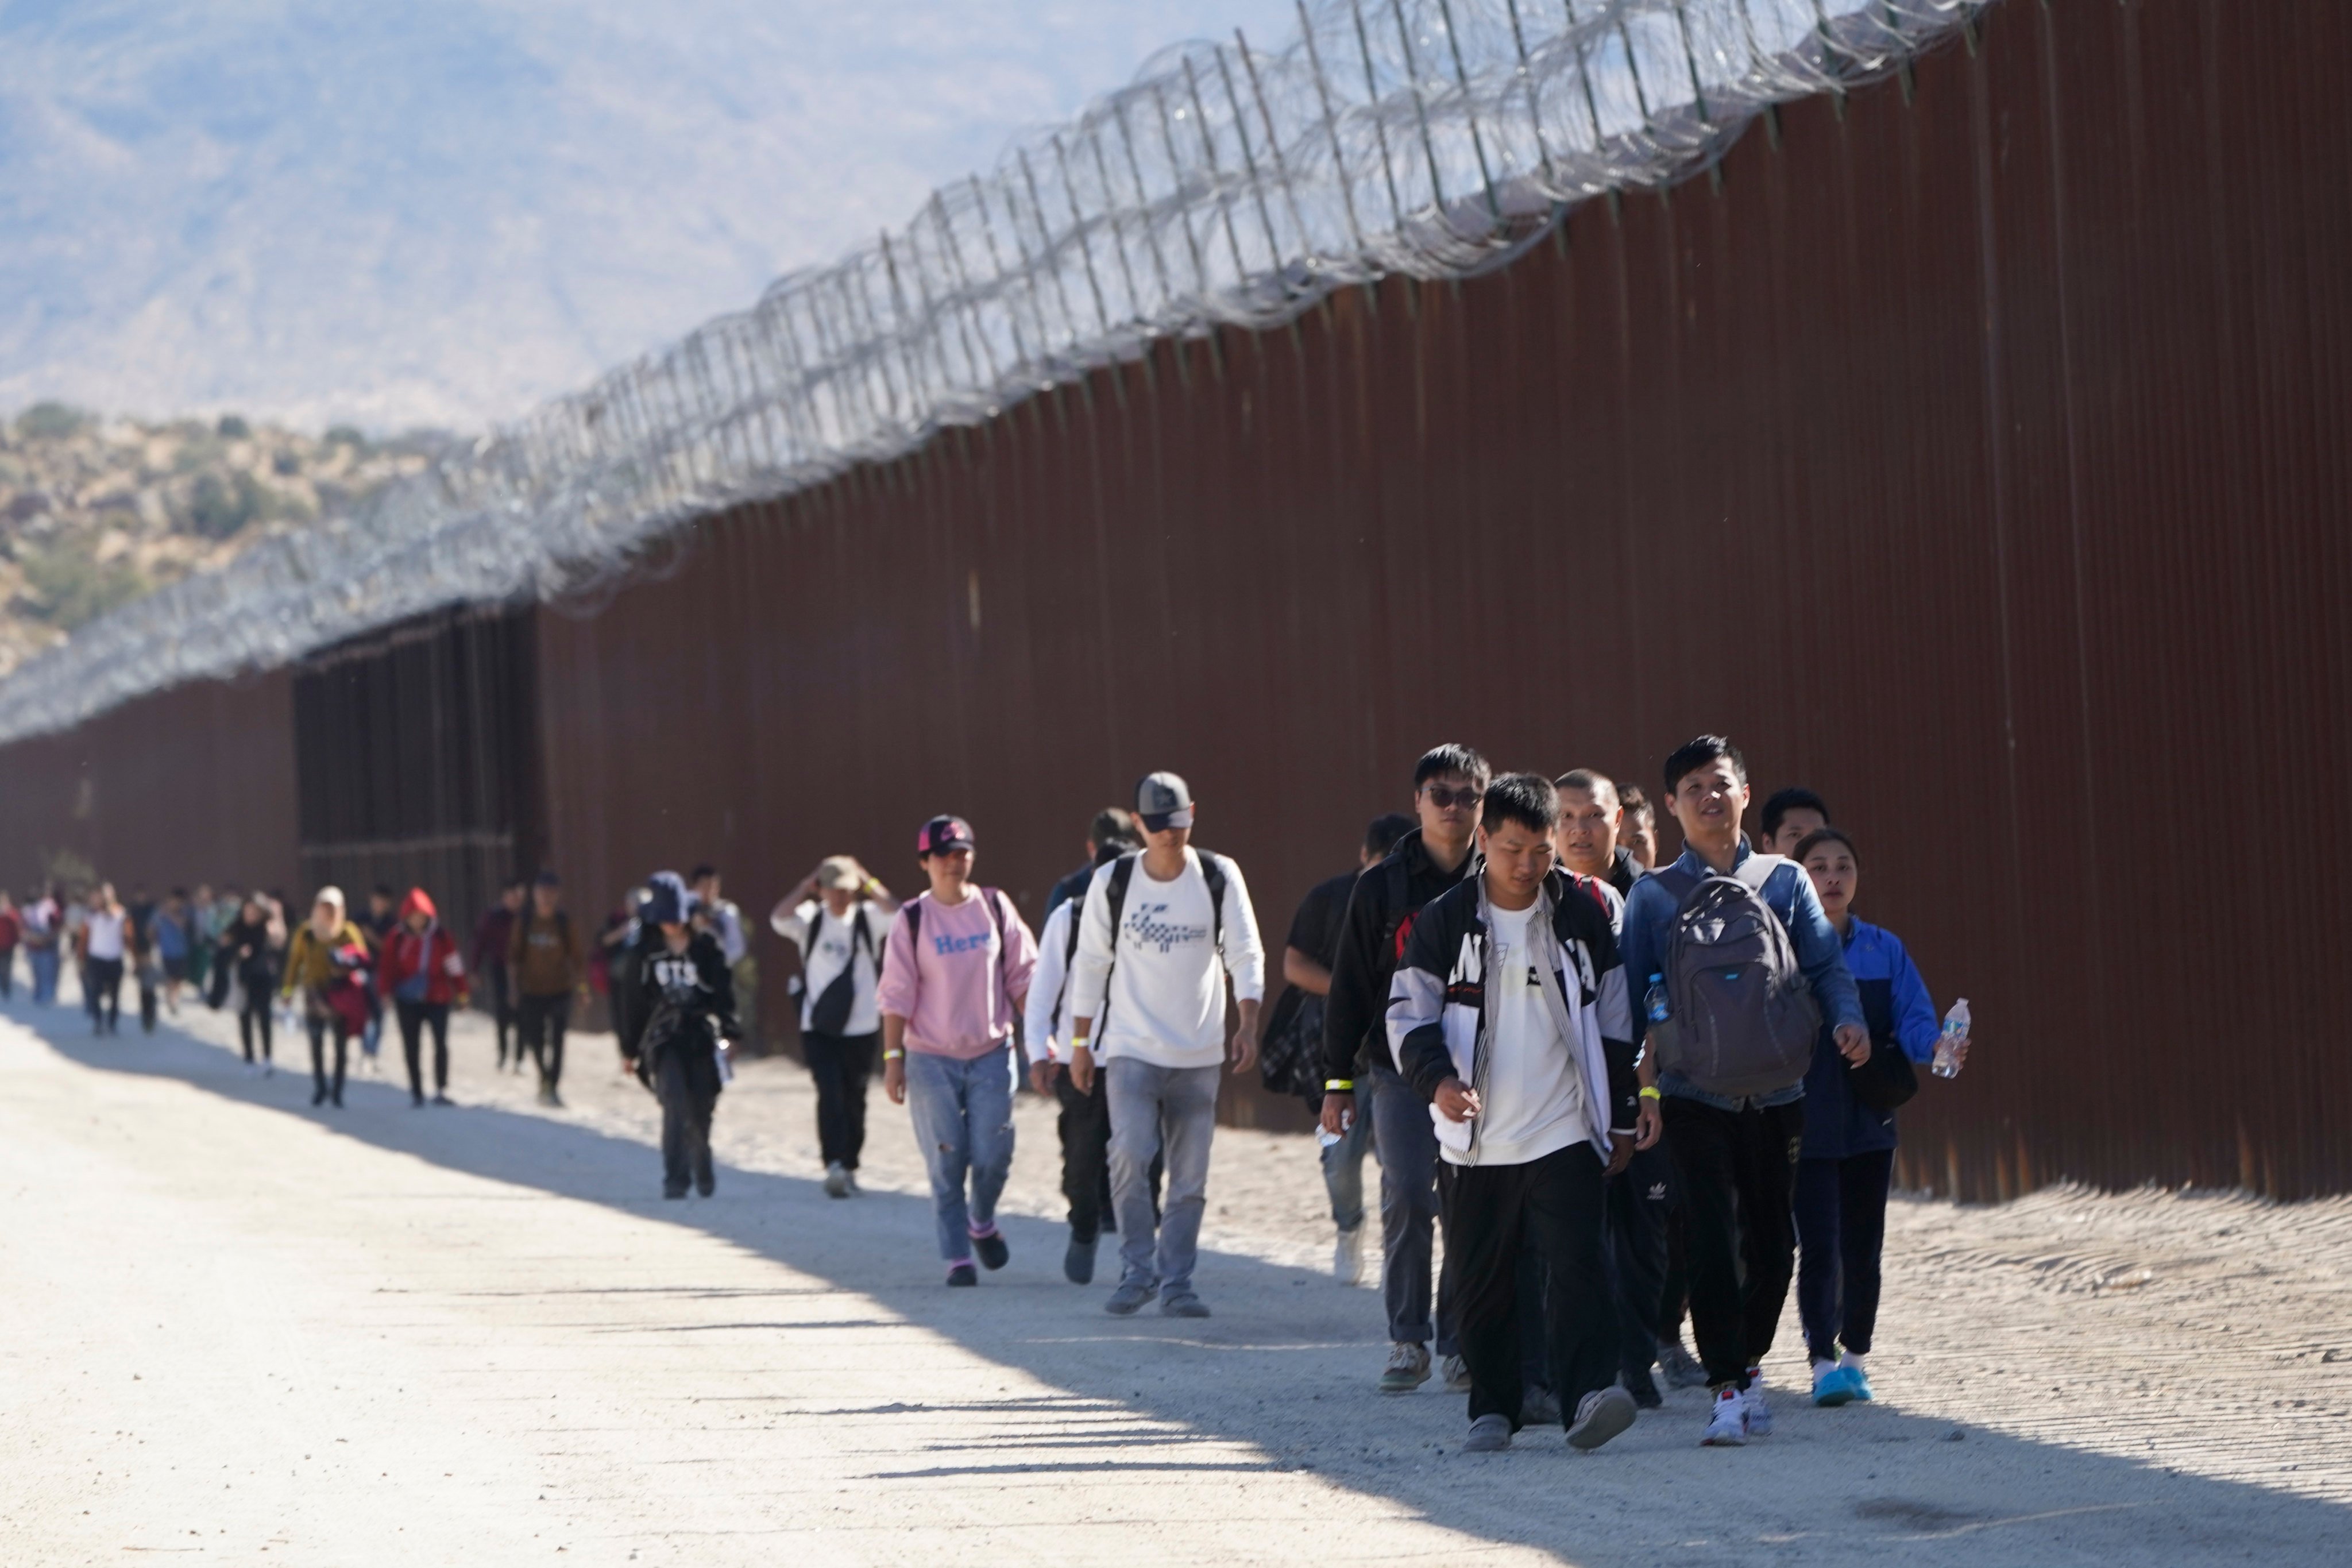 A group of people, including many from China, walk along the wall after crossing the border with Mexico to seek asylum, near Jacumba, California. File photo: AP